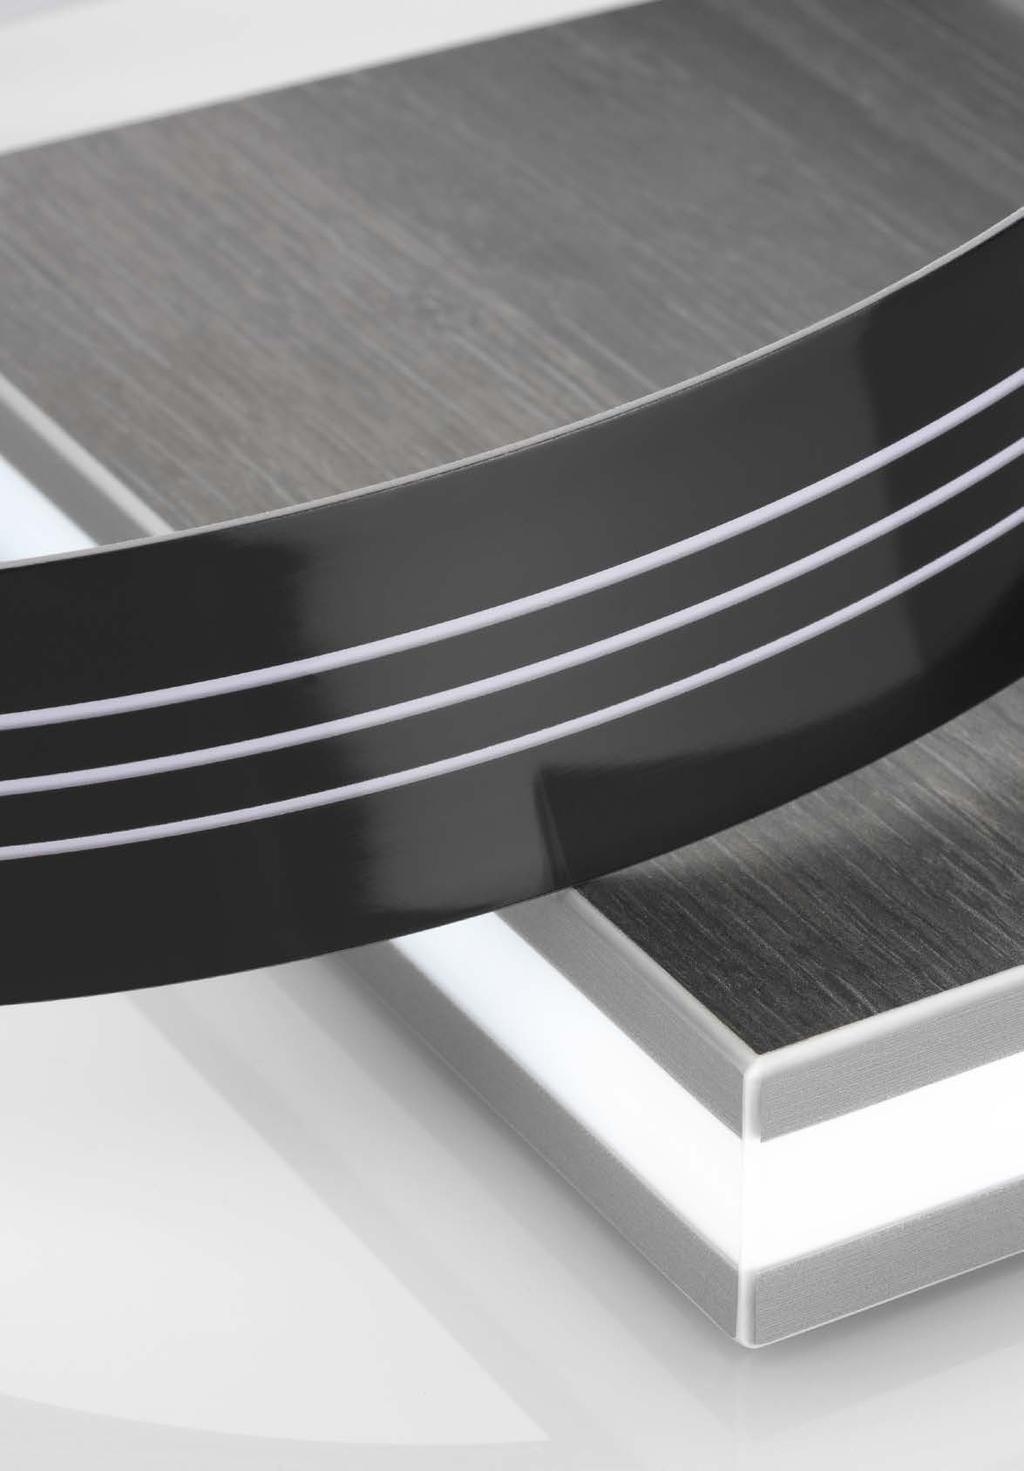 RAUKANTEX LITE Premium Selection: Translucent edgebands RAUKANTEX lite comes from the RAUKANTEX magic 3D product family. But RAUKANTEX lite can be used for backlighting as well as conventional edging.